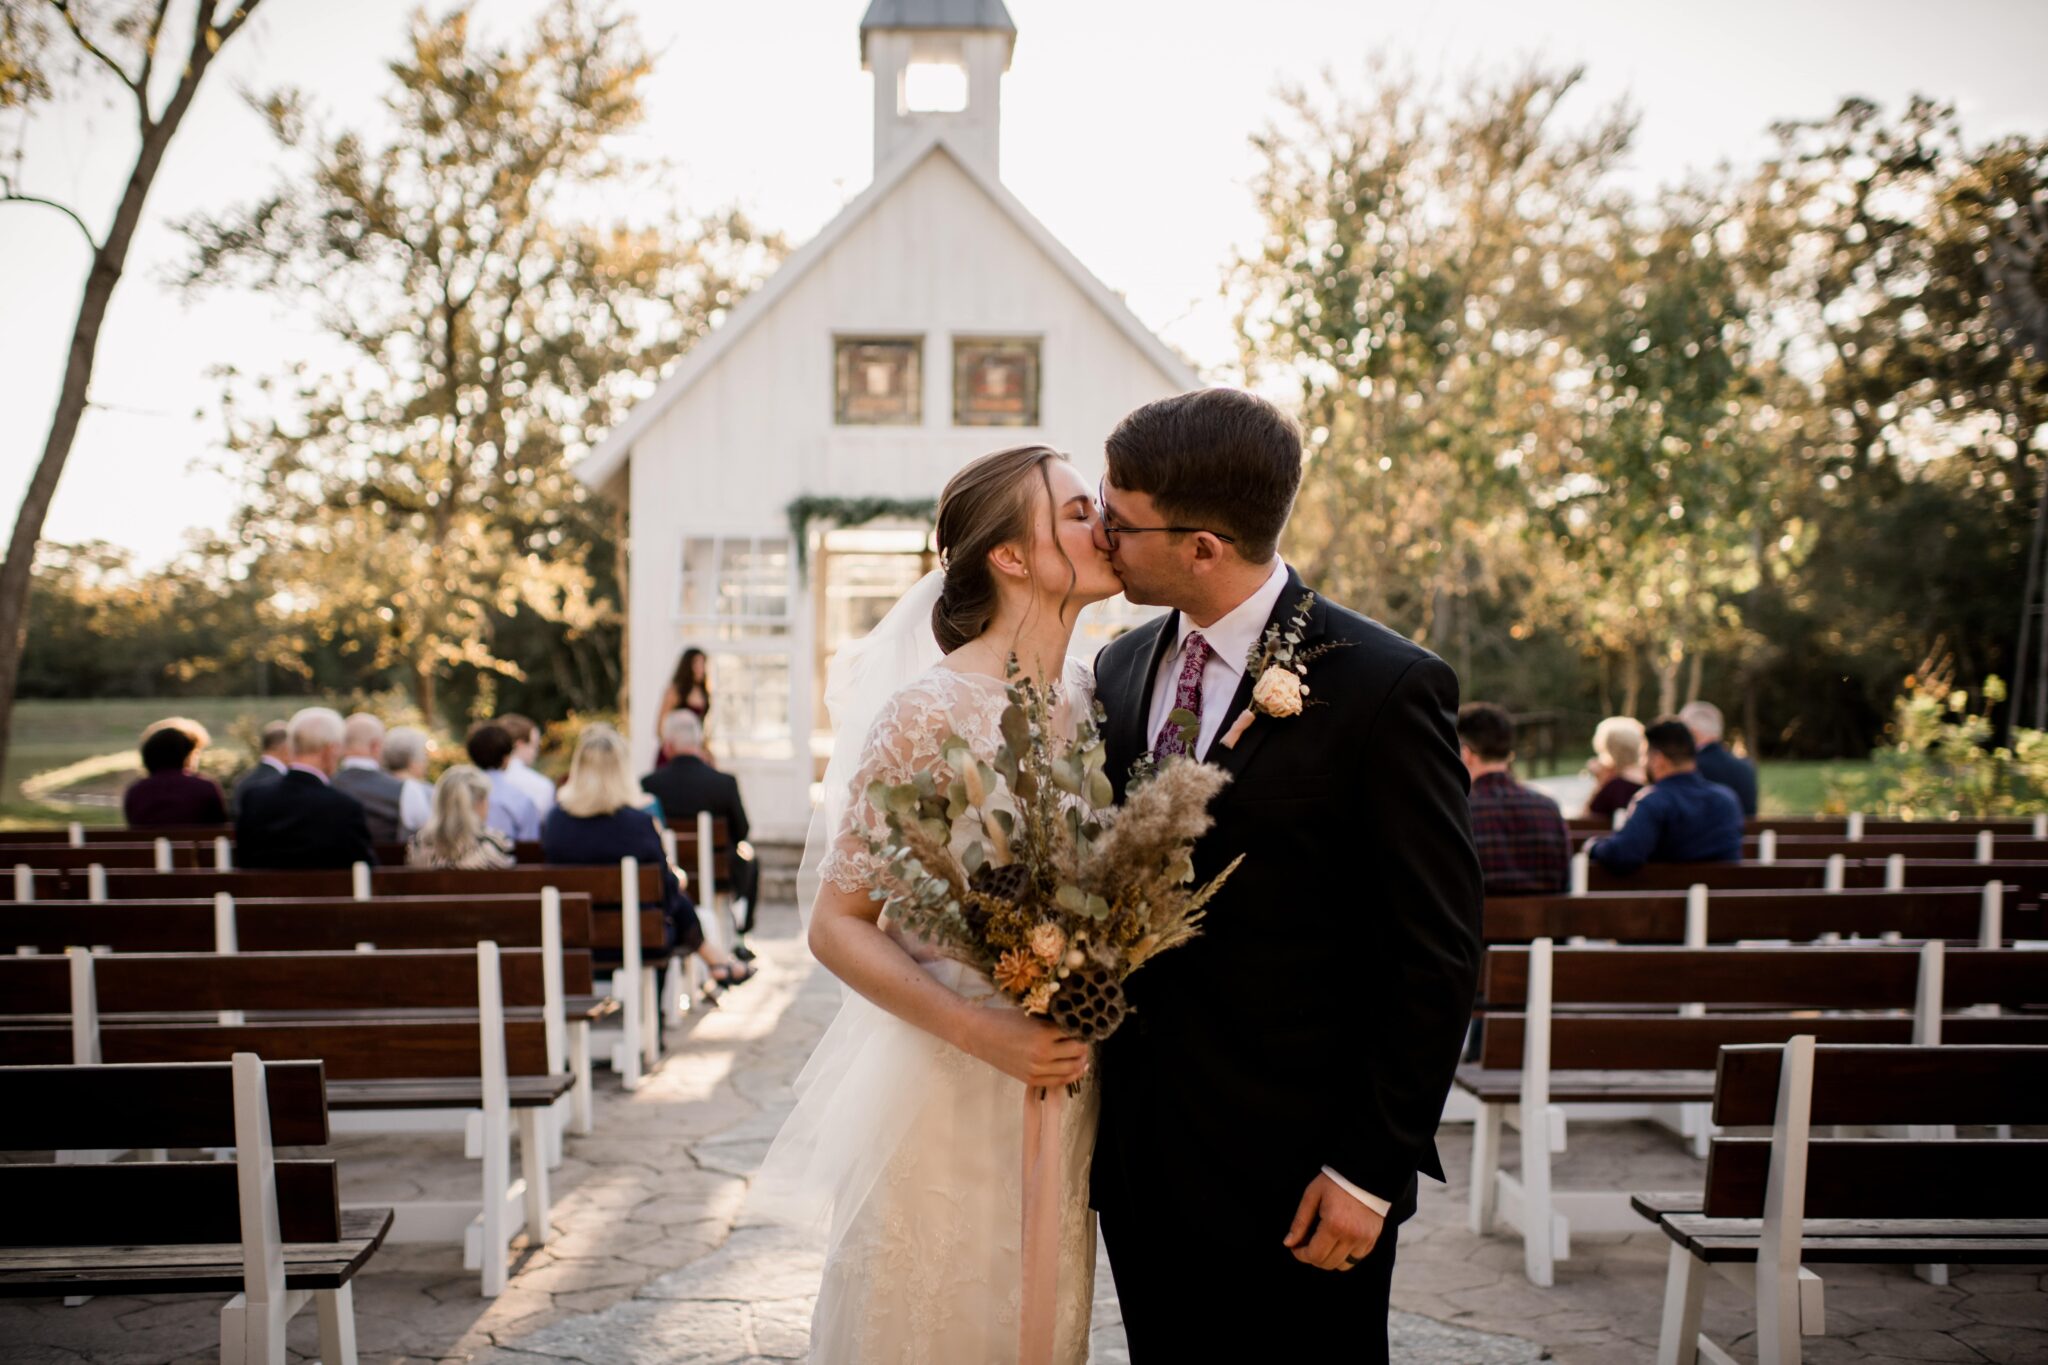 the texas bride and groom share their first kiss as newlyweds in golden hour at 7F Lodge